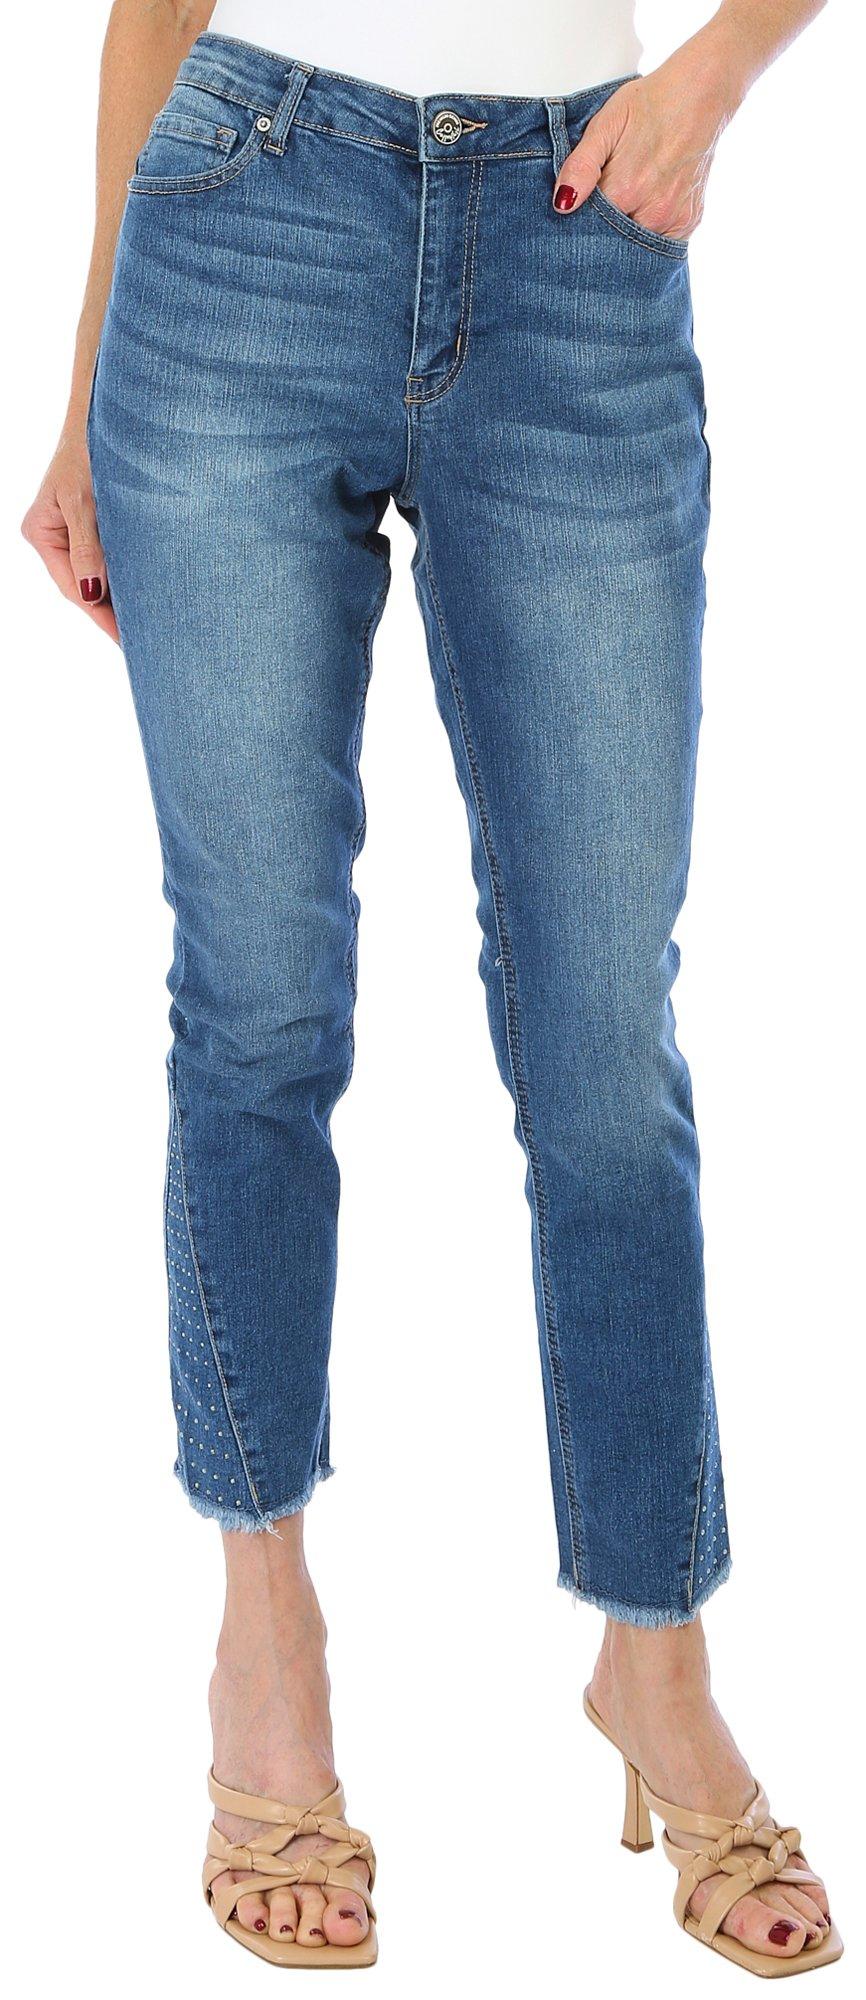 Womens Sequined Cut Off Jeans